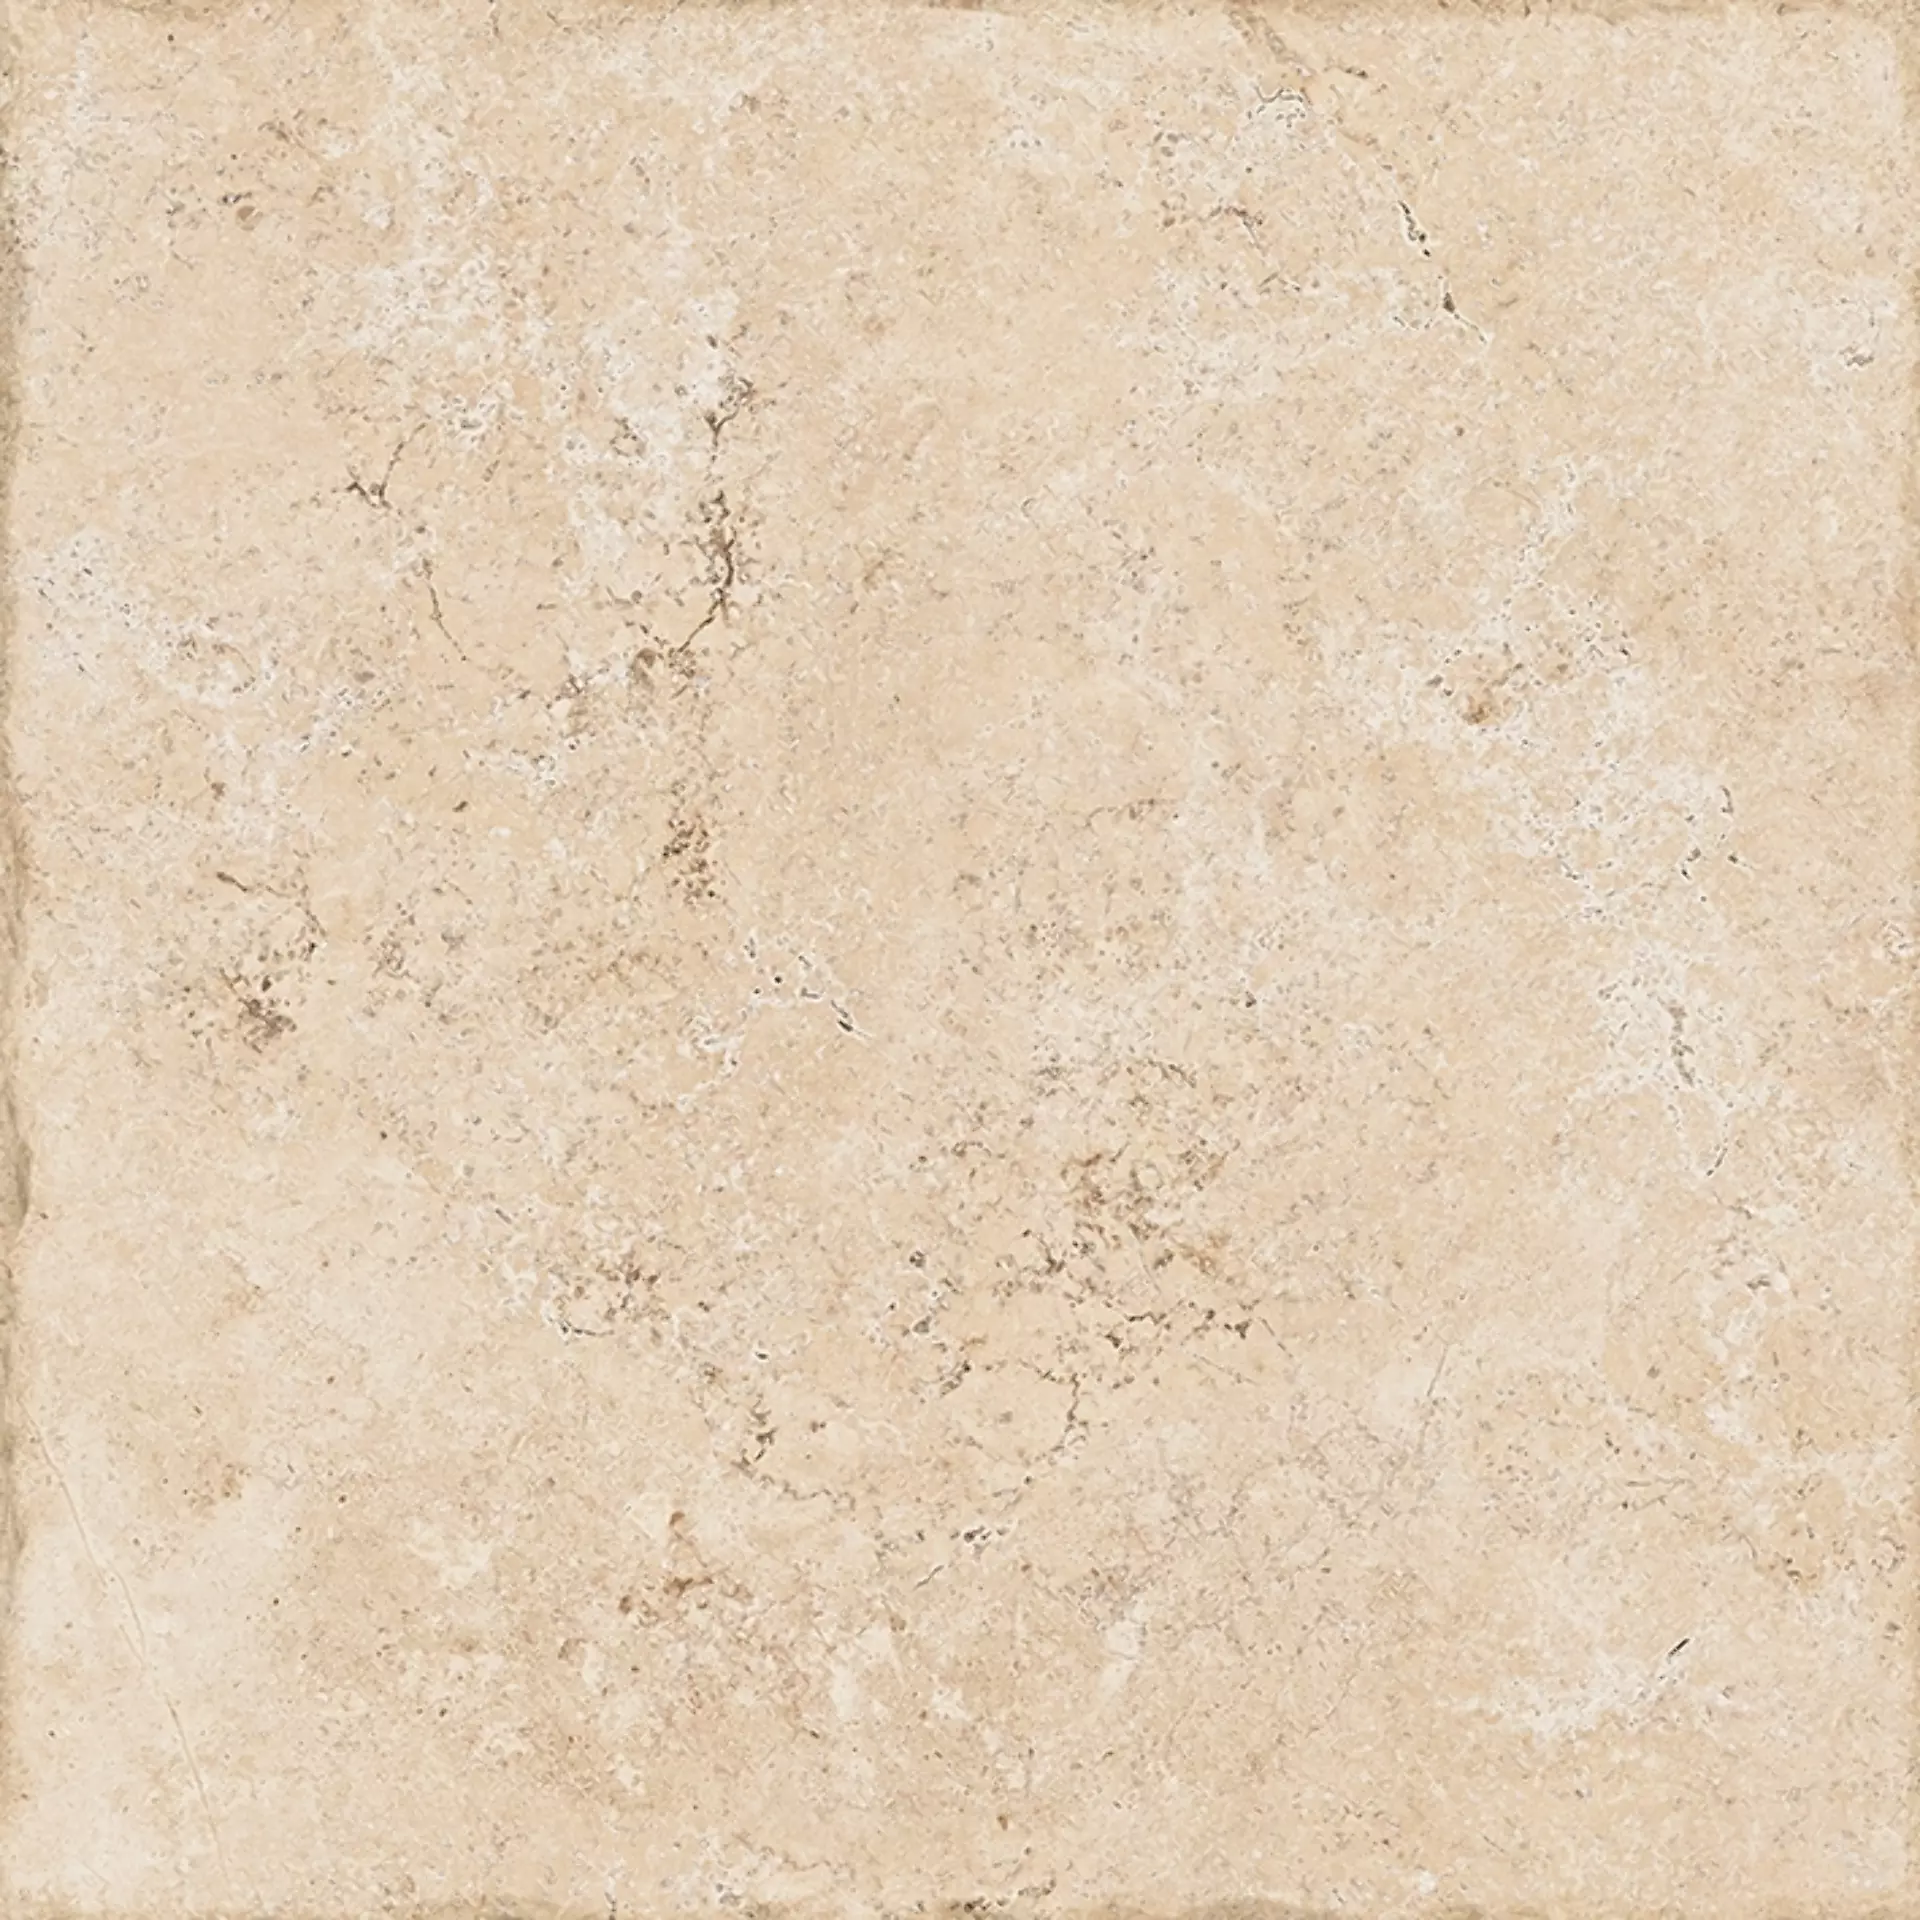 Sichenia Amboise Beige Smooth Chipped Edge 0192662 60x60cm rectified 10mm